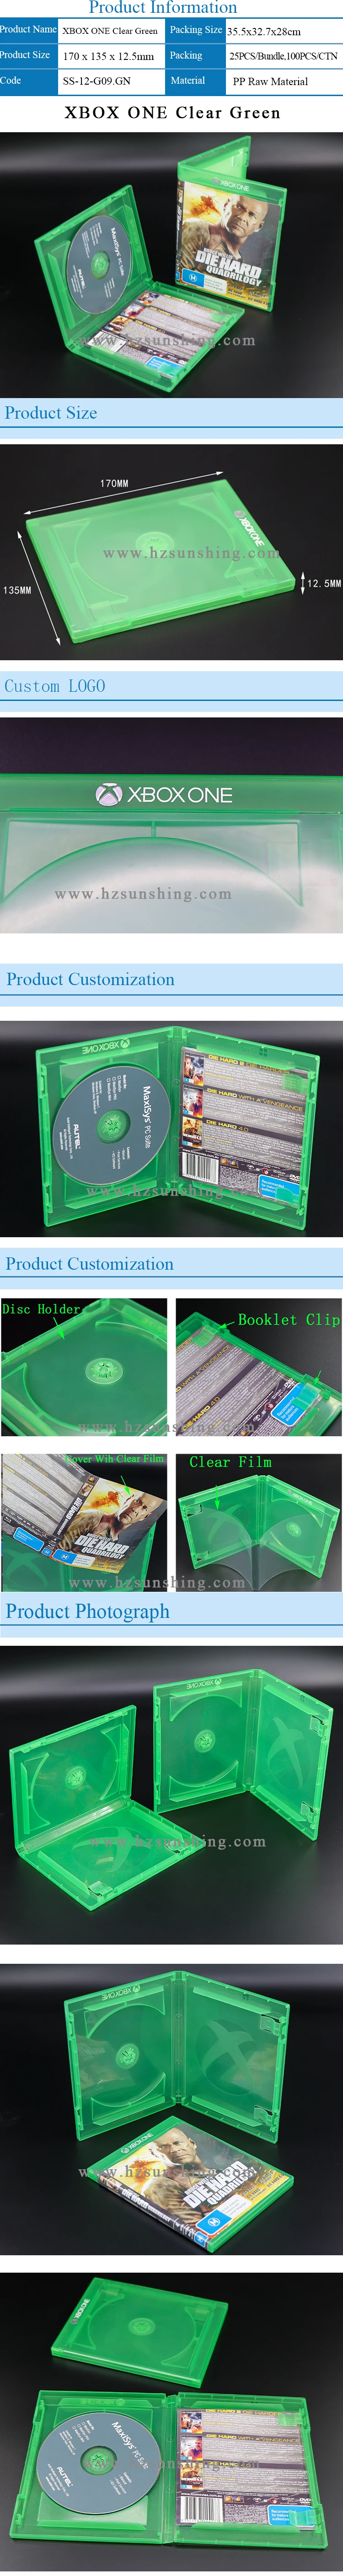 Plastic Storage Packaging X Box One Game Case Umd Game Case Ps Vita Game Case Buy X Box Game Case Green Umd Game Case Ps Vita Game Case Product On Alibaba Com